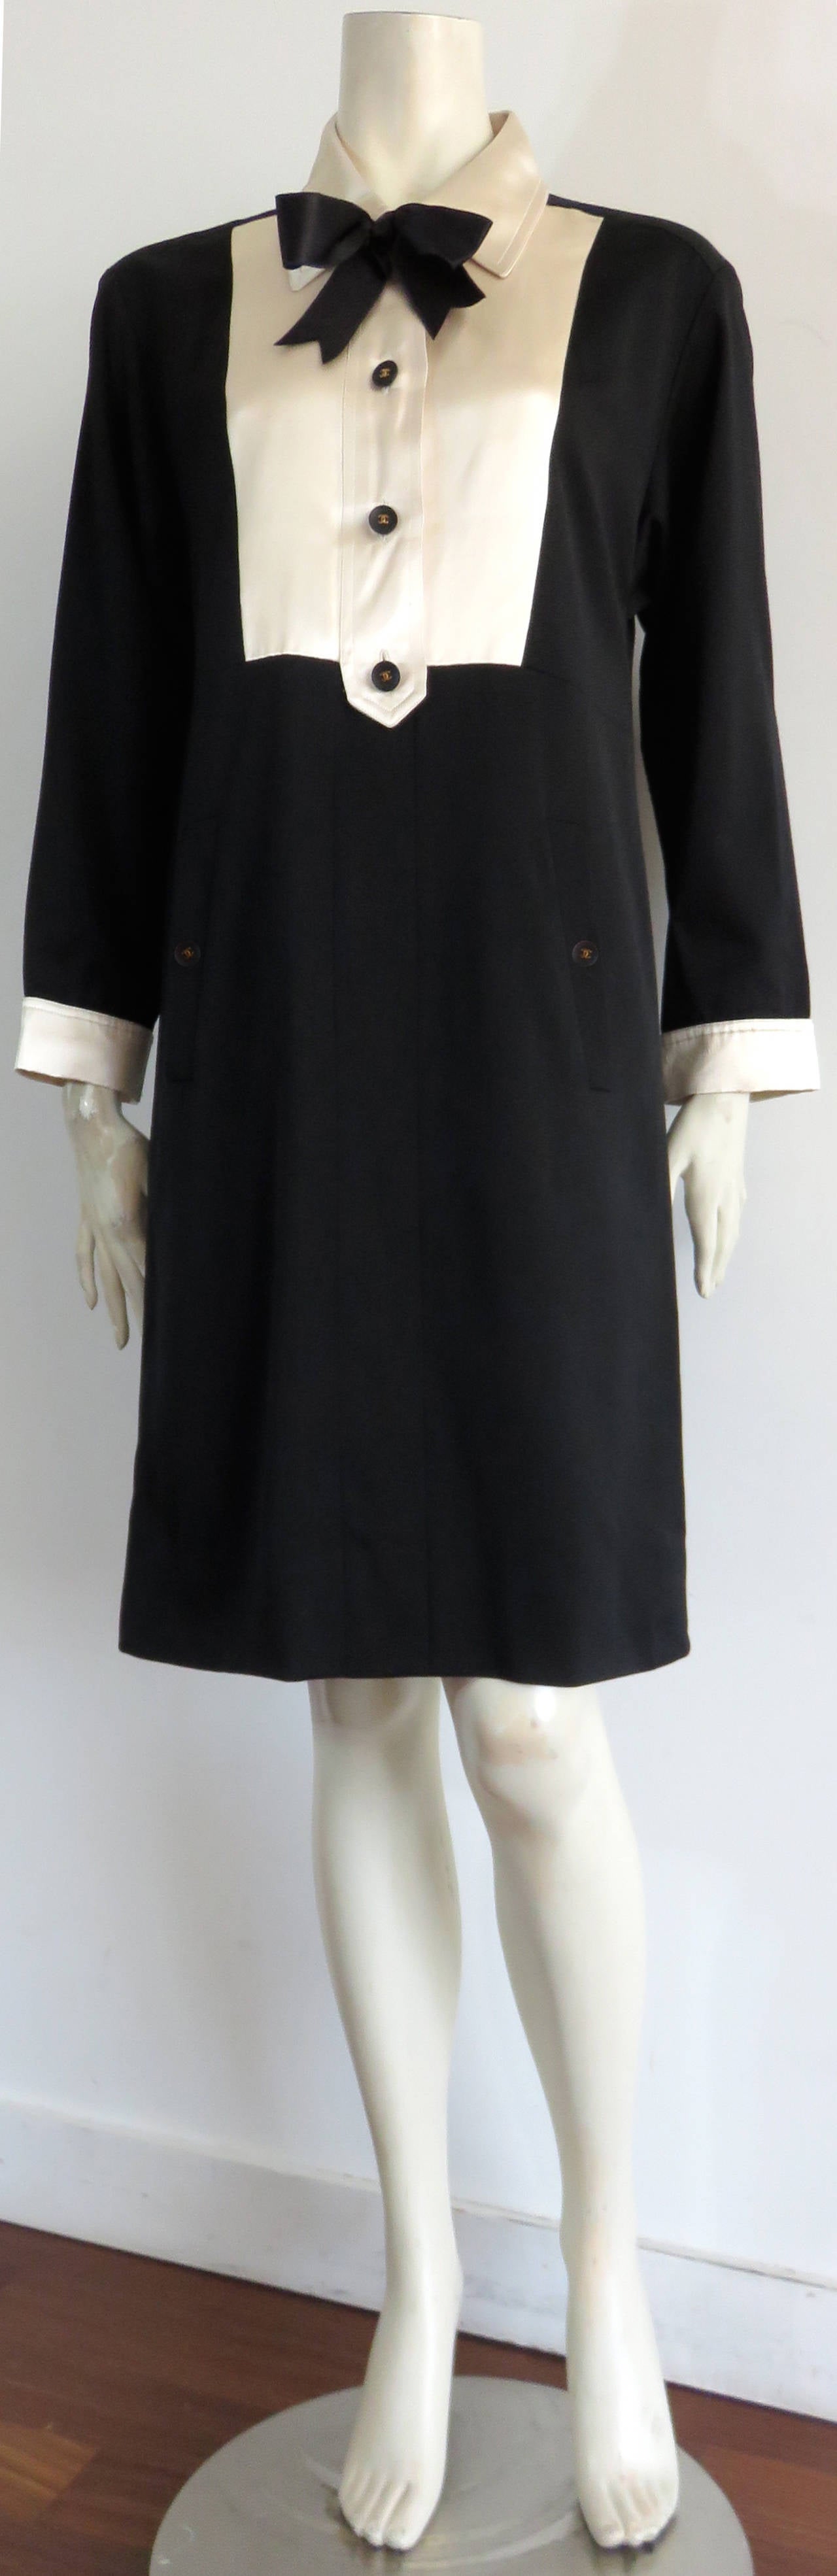 Lovely CHANEL PARIS Silk, bib-front, 'tuxedo' dress.

Black wool shell with ivory silk bib front, collar, and cuffs.  Silk, black ribbon bow  detail at front neck.  

Black buttons with gold finished, metal 'CC' logo centers.

Twin front